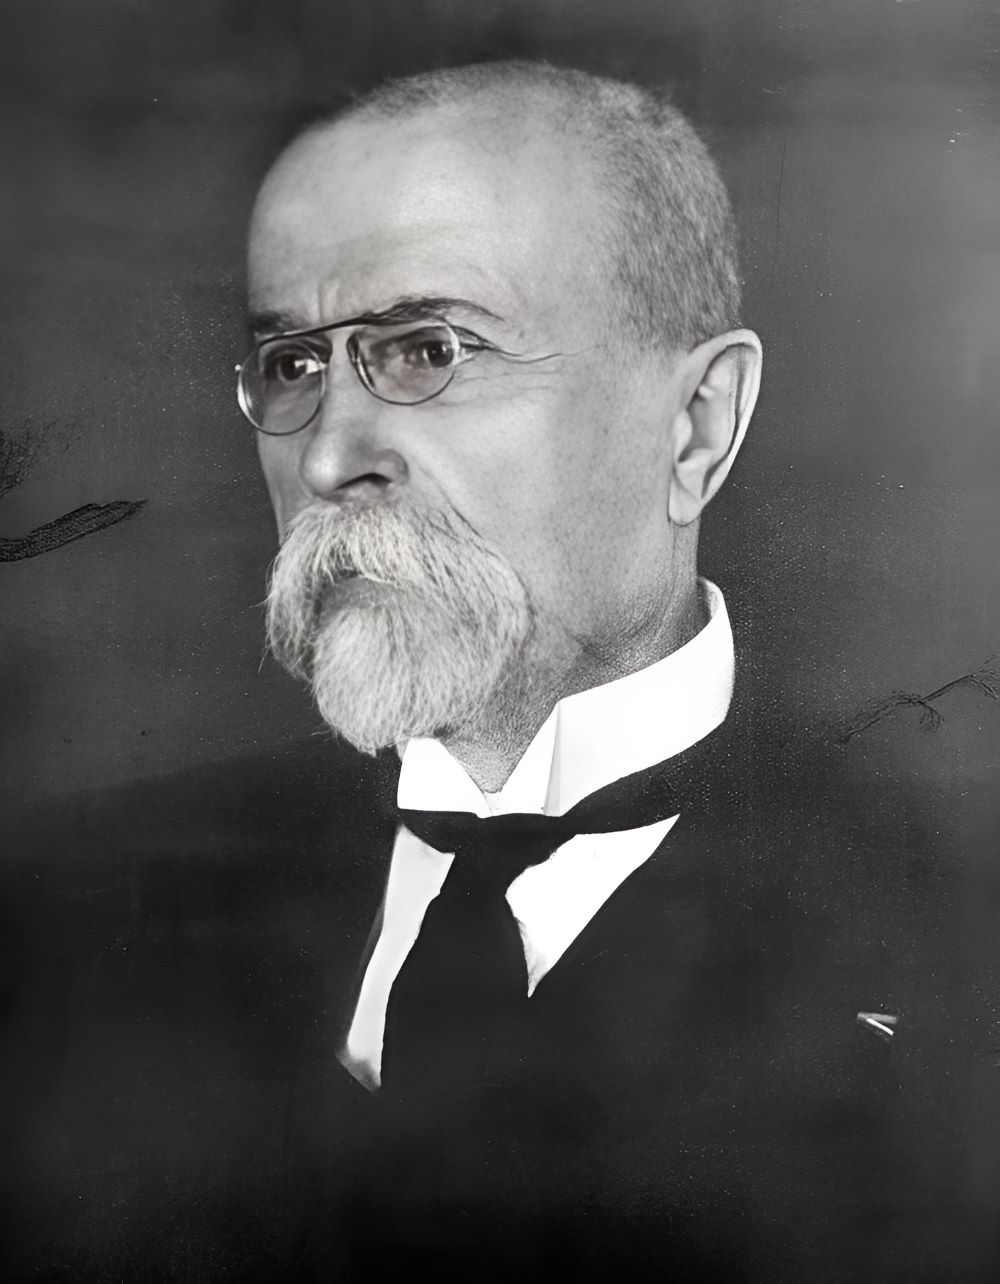 Tomáš Garrigue Masaryk (7 March 1850 – 14 September 1937) was a Czechoslovak statesman, political activist and philosopher who served as the first president of Czechoslovakia from 1918 to 1935